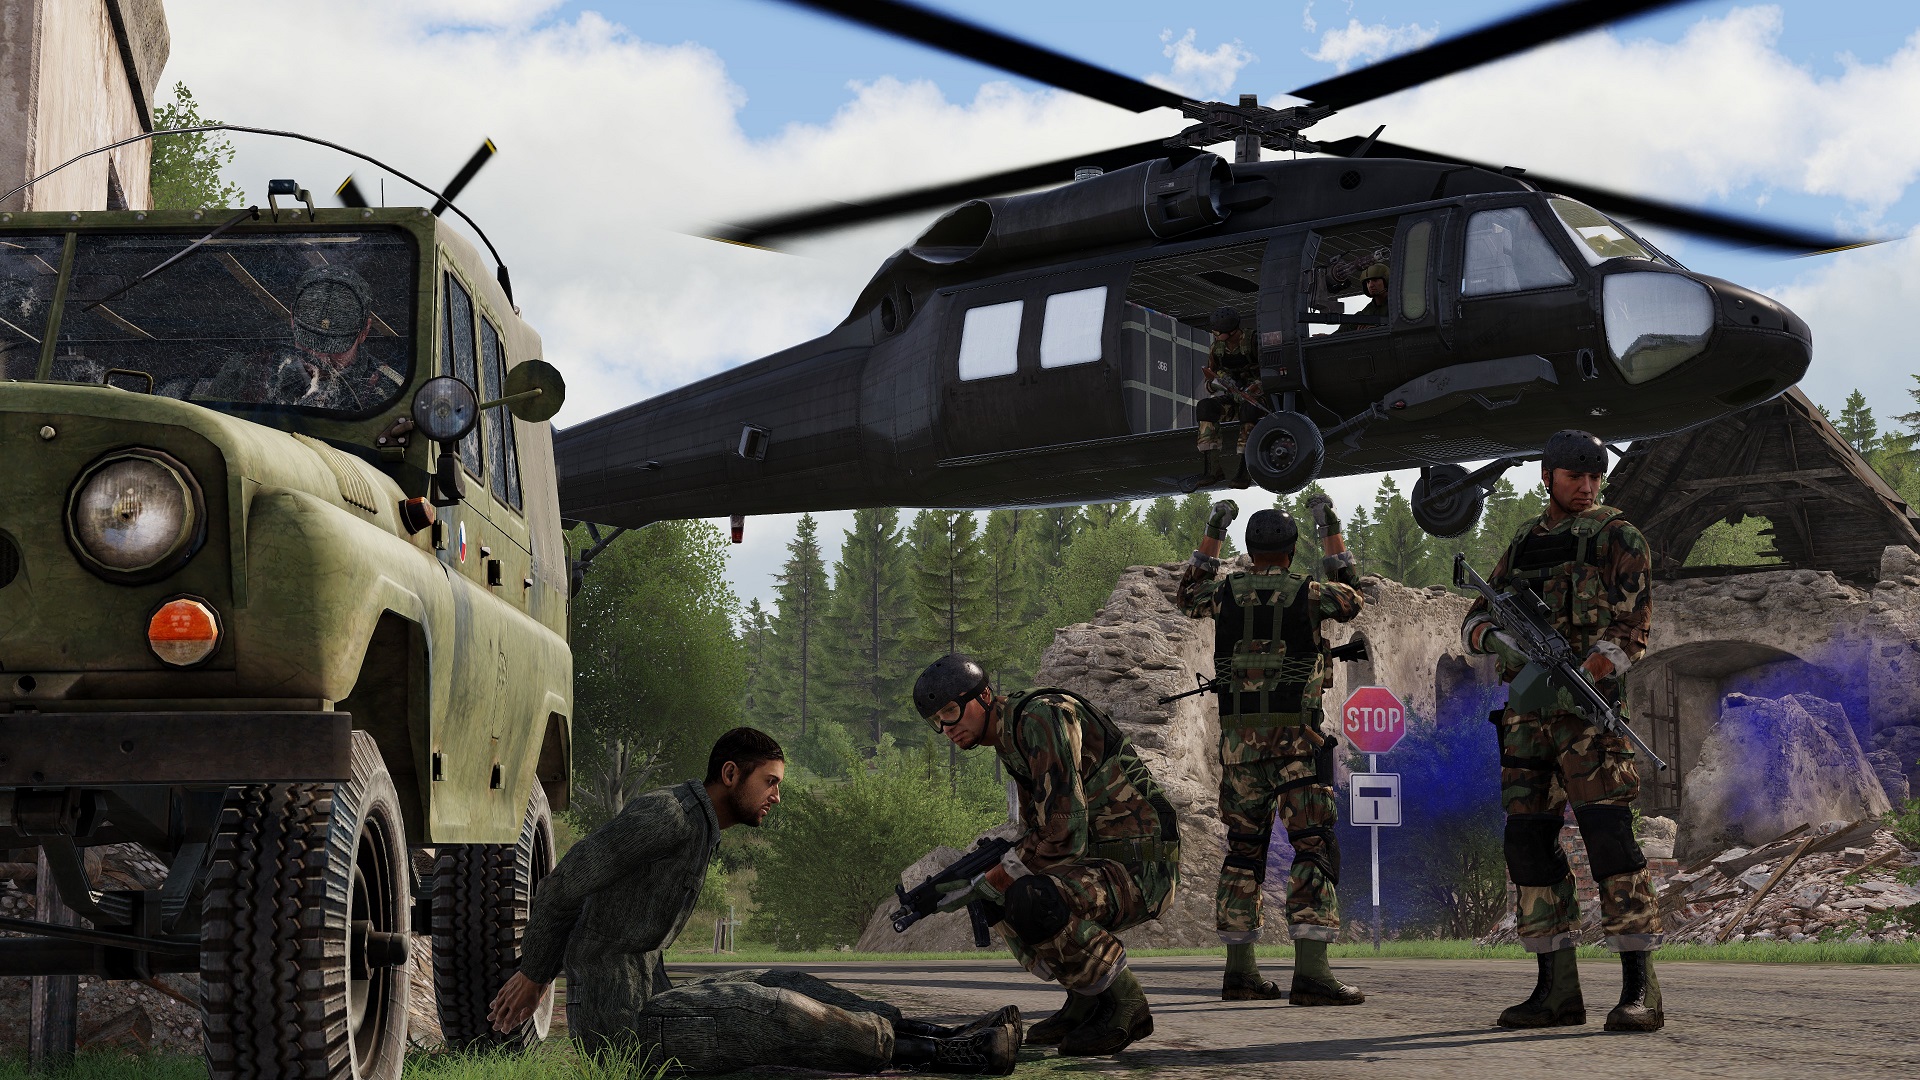 What's next for Arma 3?